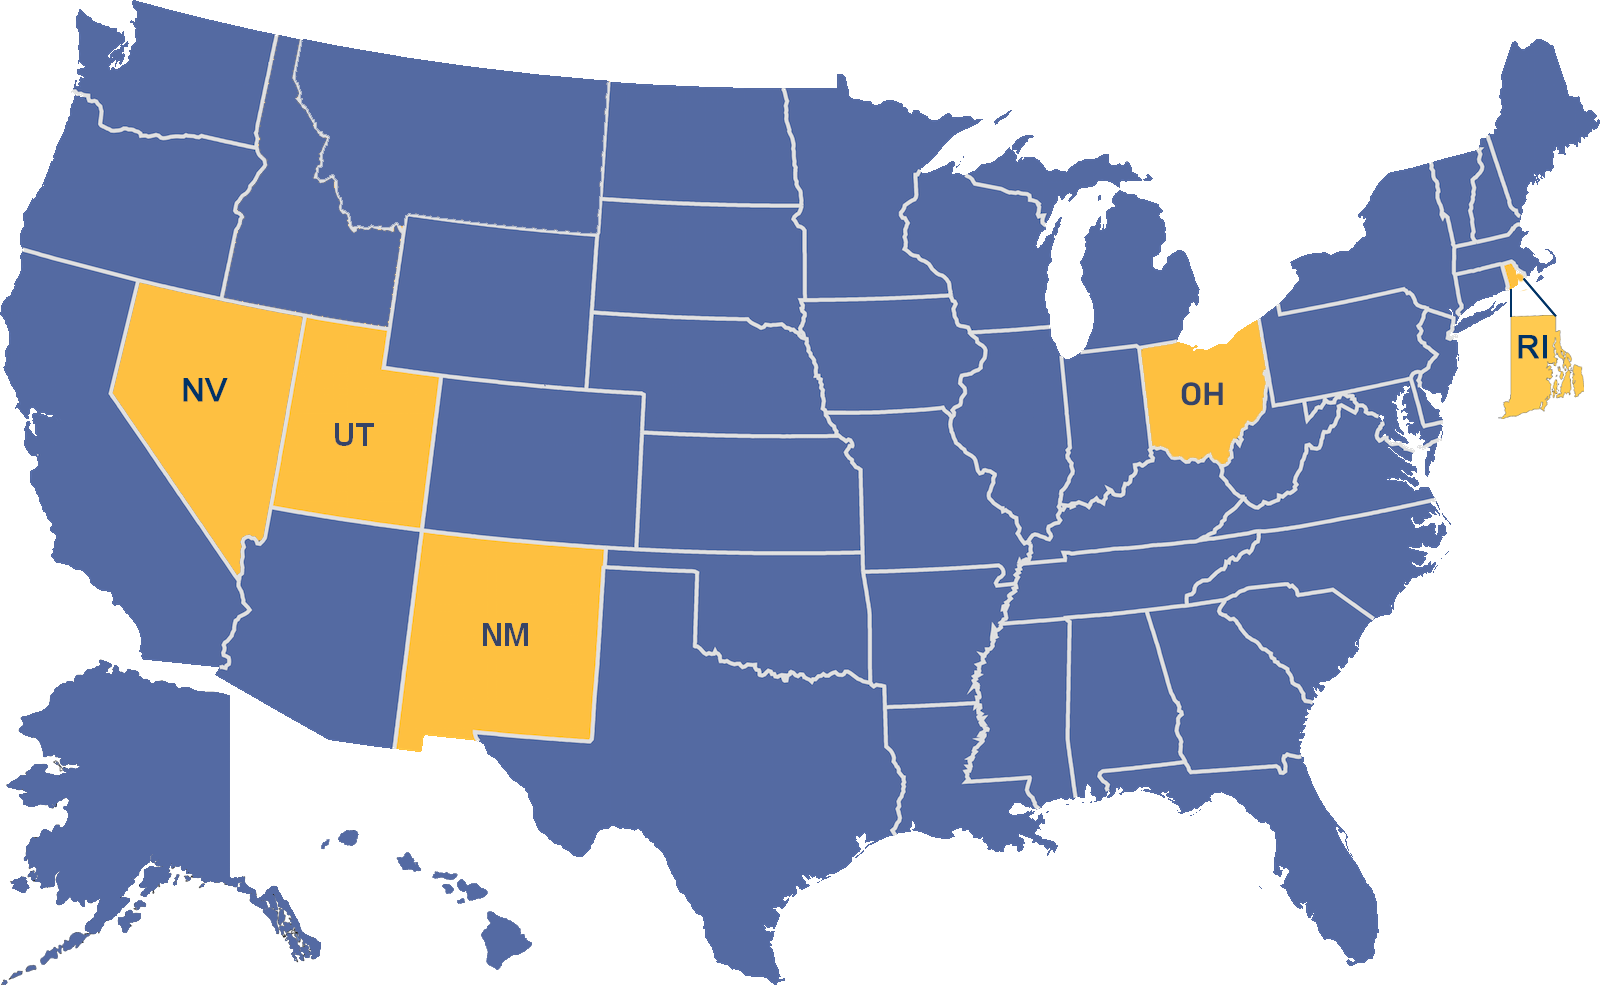 Map of the United States with Portal Partner states (Montana, Nevada, Utah, New Mexico, and Rhode Island) highlighted